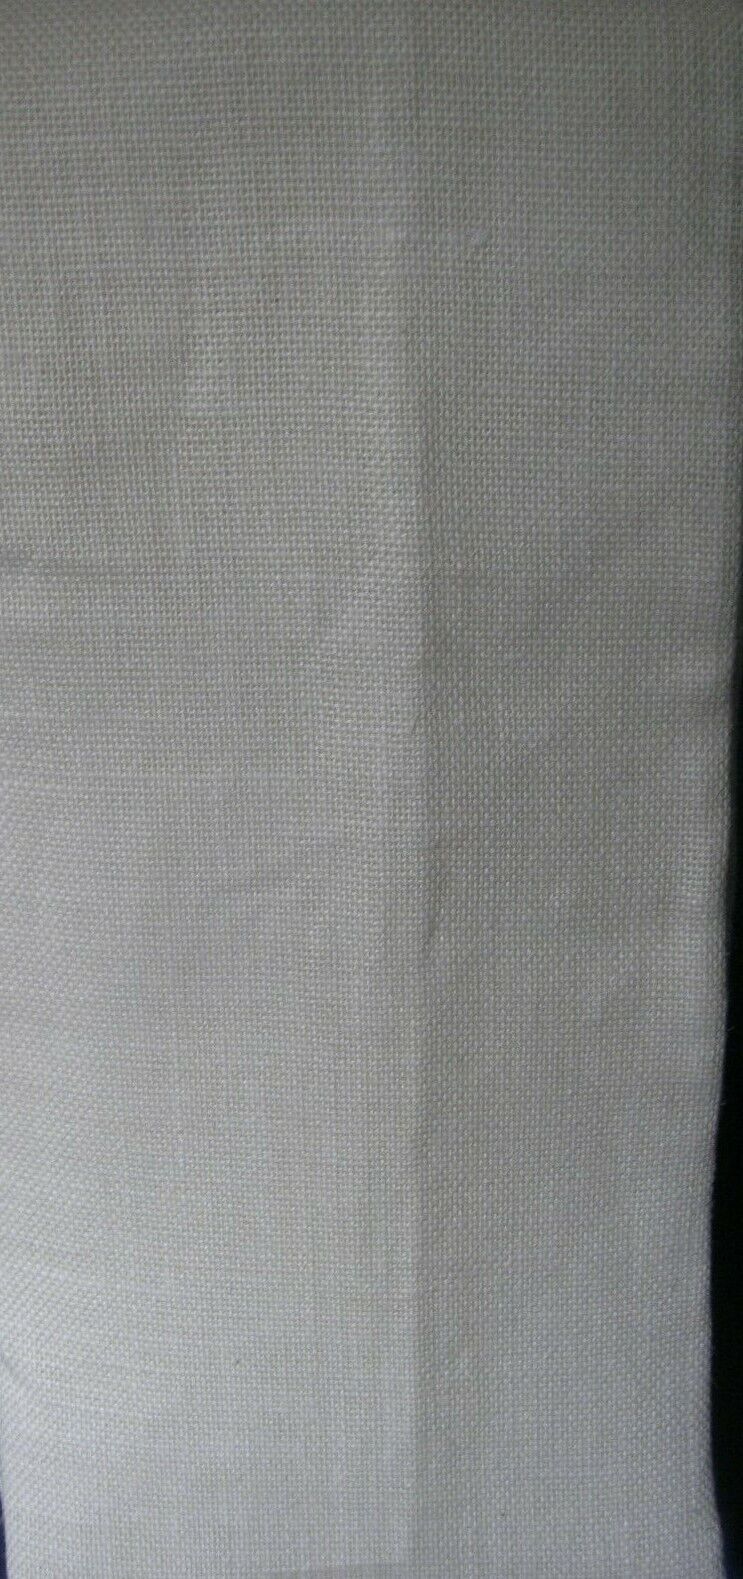 IVORY LINEN BACKING FOR RUG HOOKING/CRAFTS NEW 54\